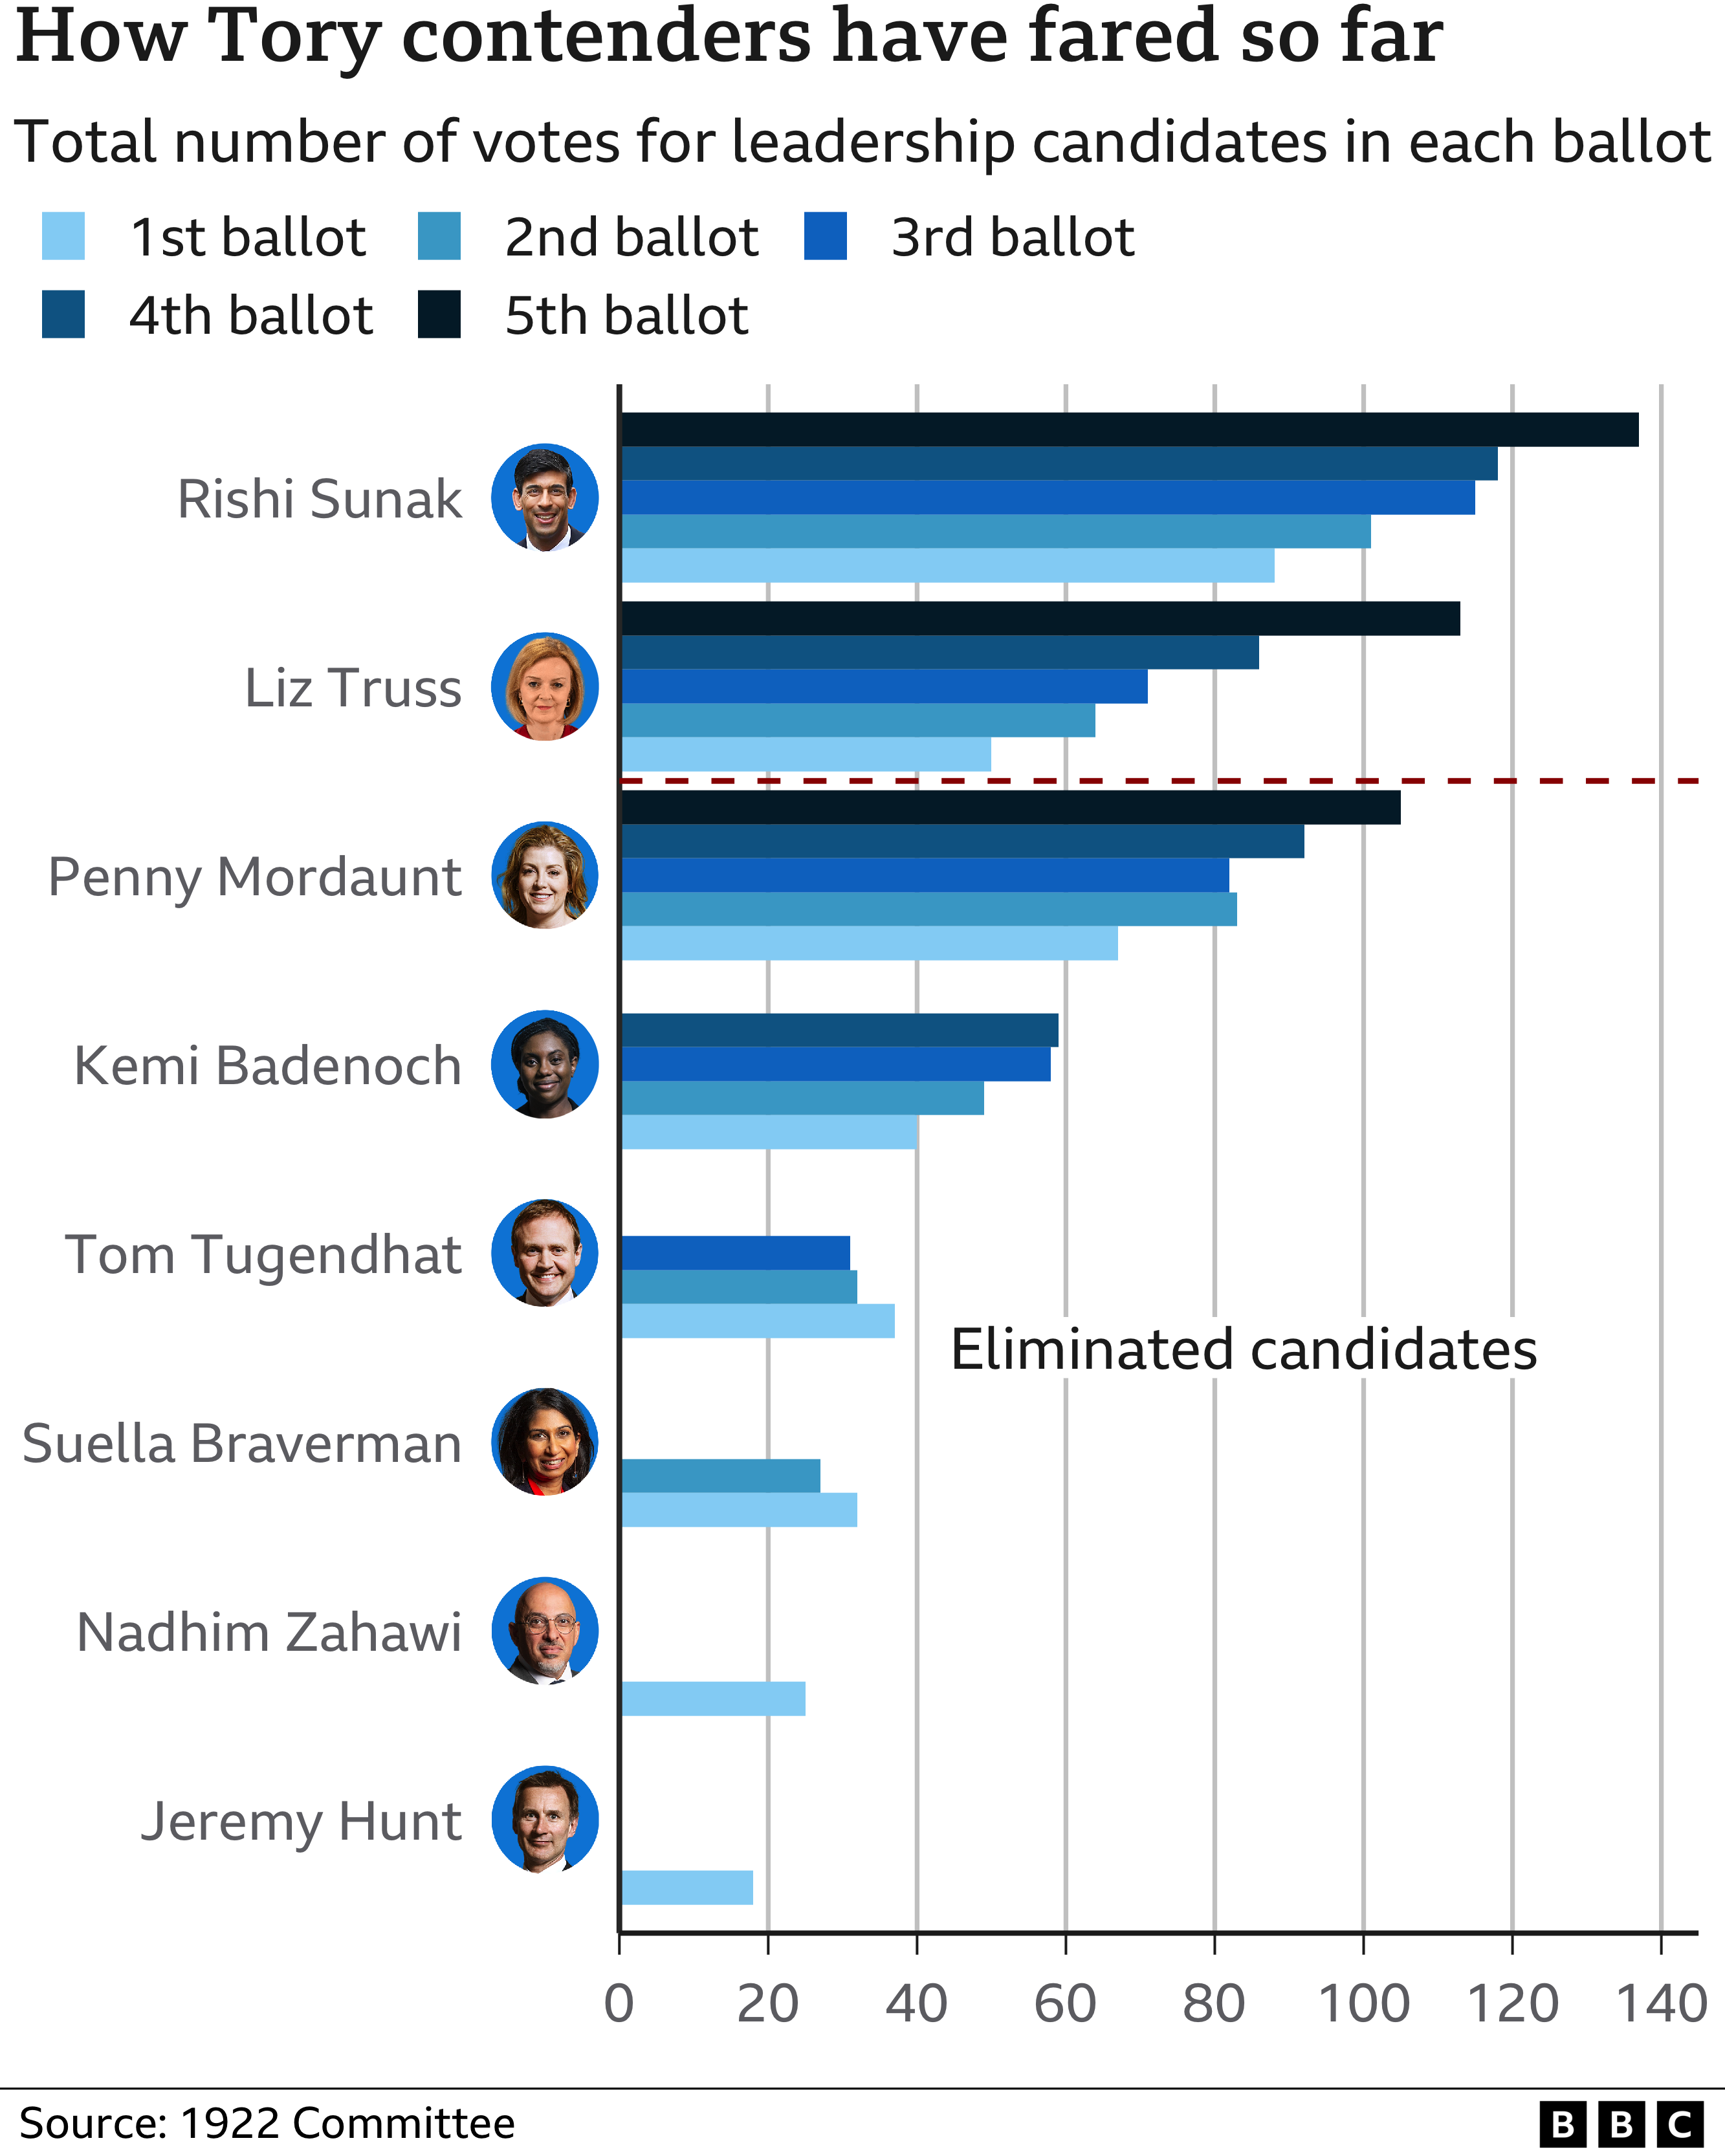 Chart showing how the candidates fared in each round of voting by Conservative MPs